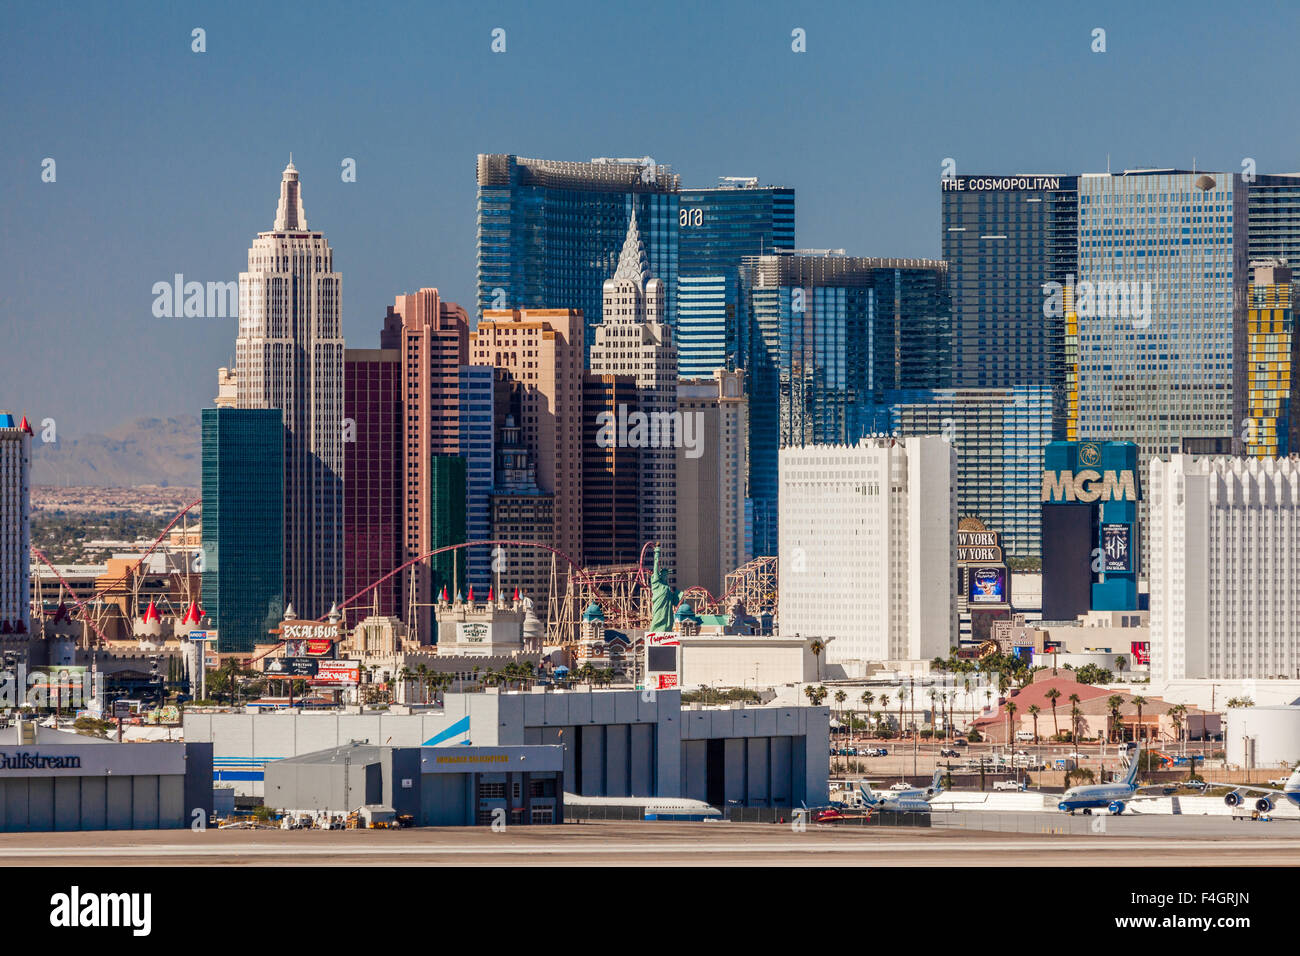 Hotels on the Las Vegas Strip with McCarran airport in the foreground Stock Photo